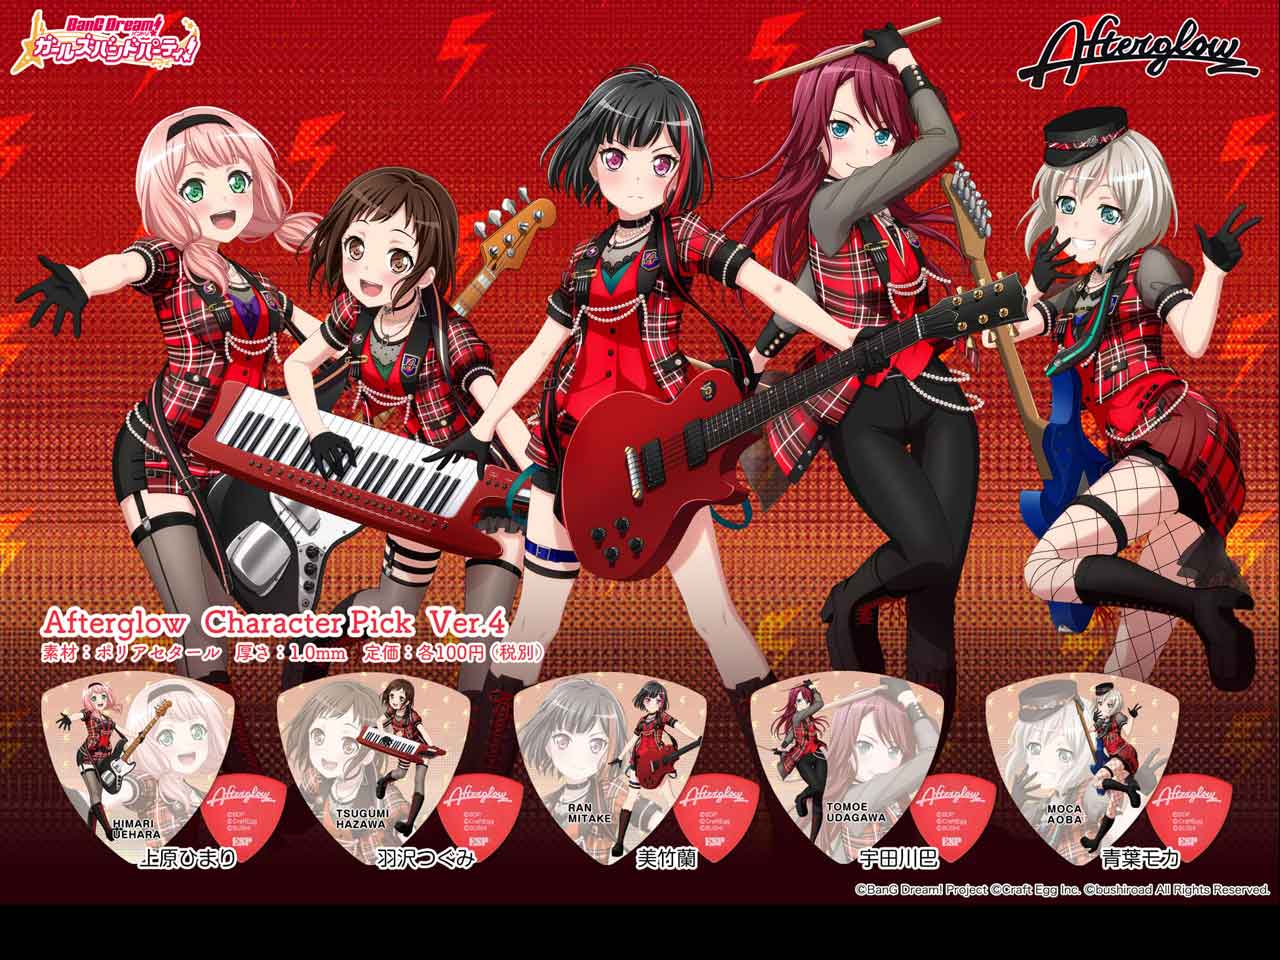 【ESP×BanG Dream!コラボピック】Afterglow Character Pick Ver.4 全5種（各一枚）セット